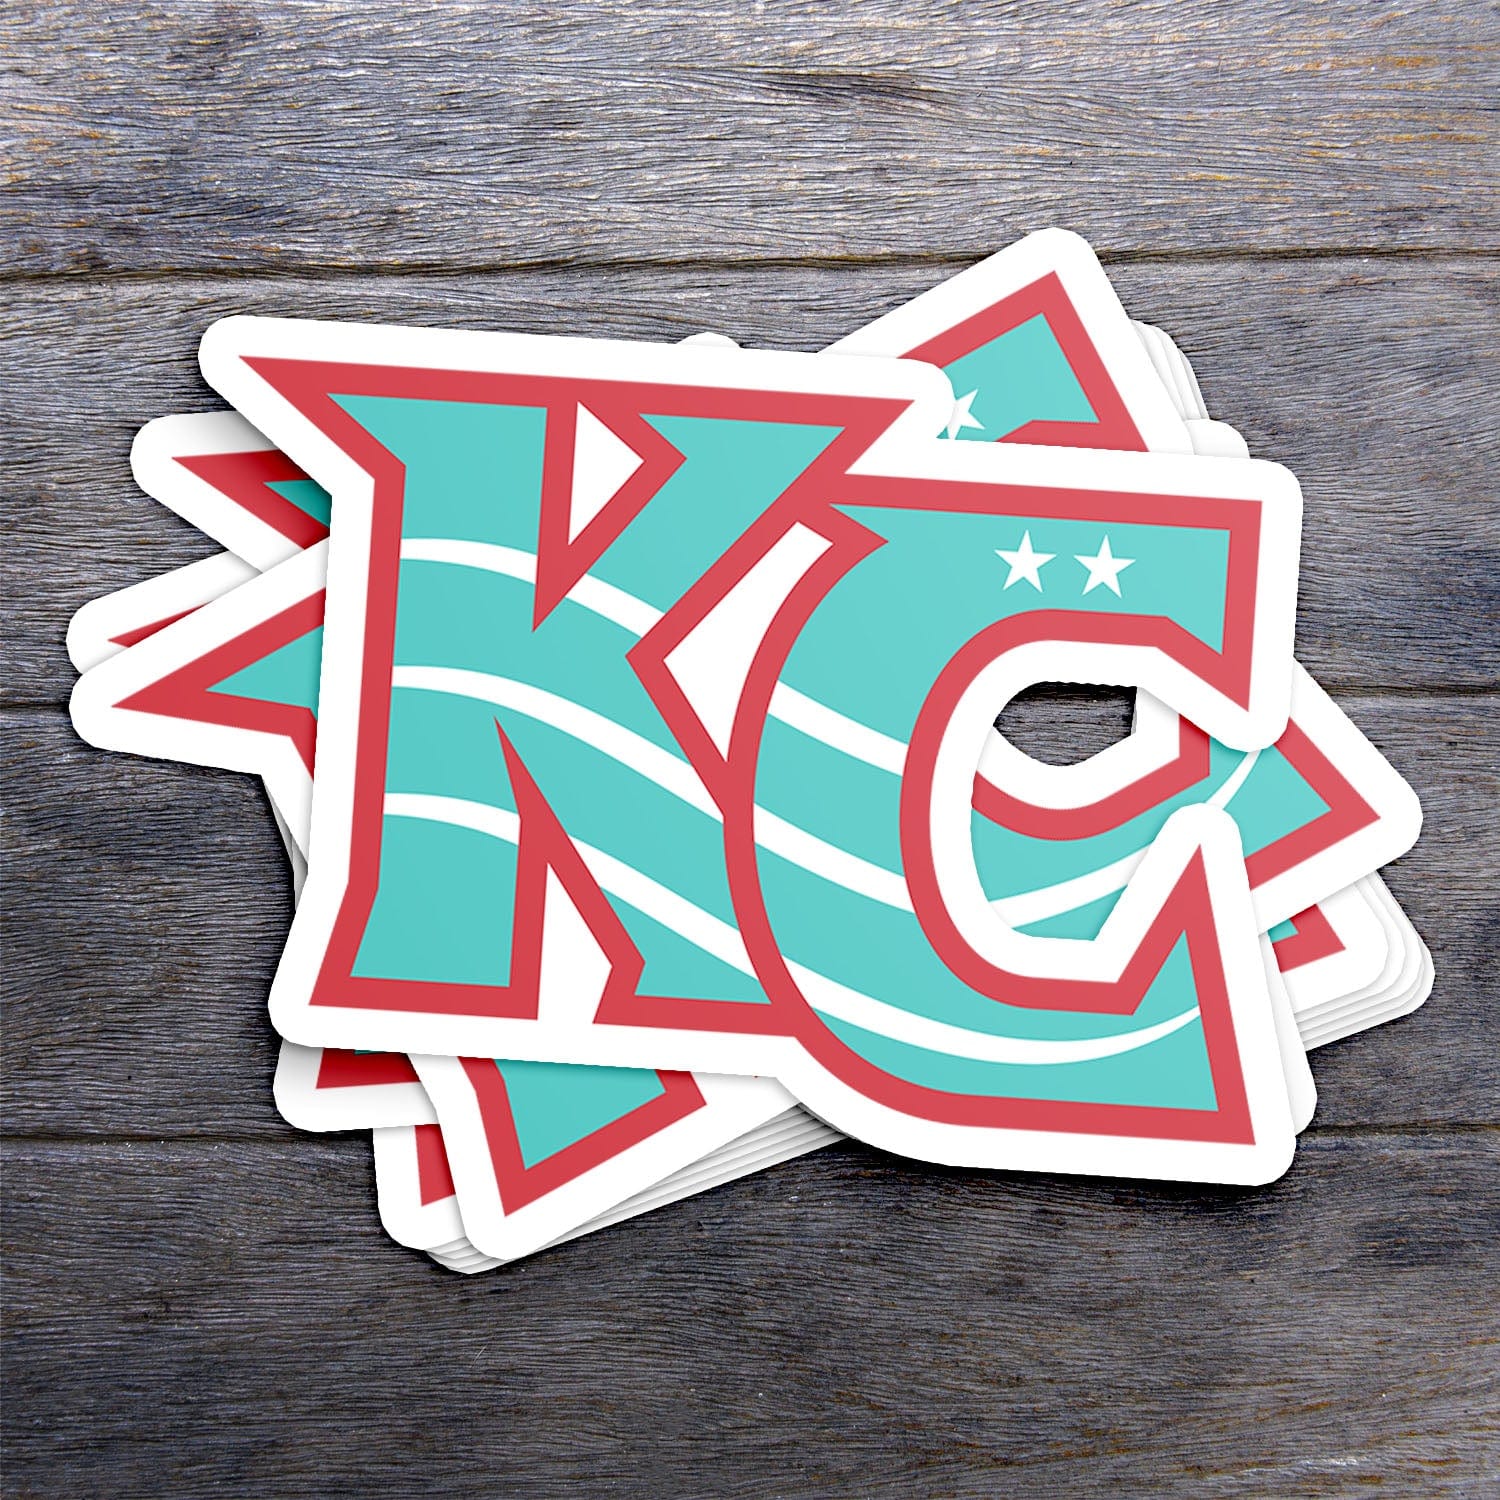 KC Swag Kansas City Current CURRENT KC die-cut sticker decal made from waterproof vinyl stack on dark wood table